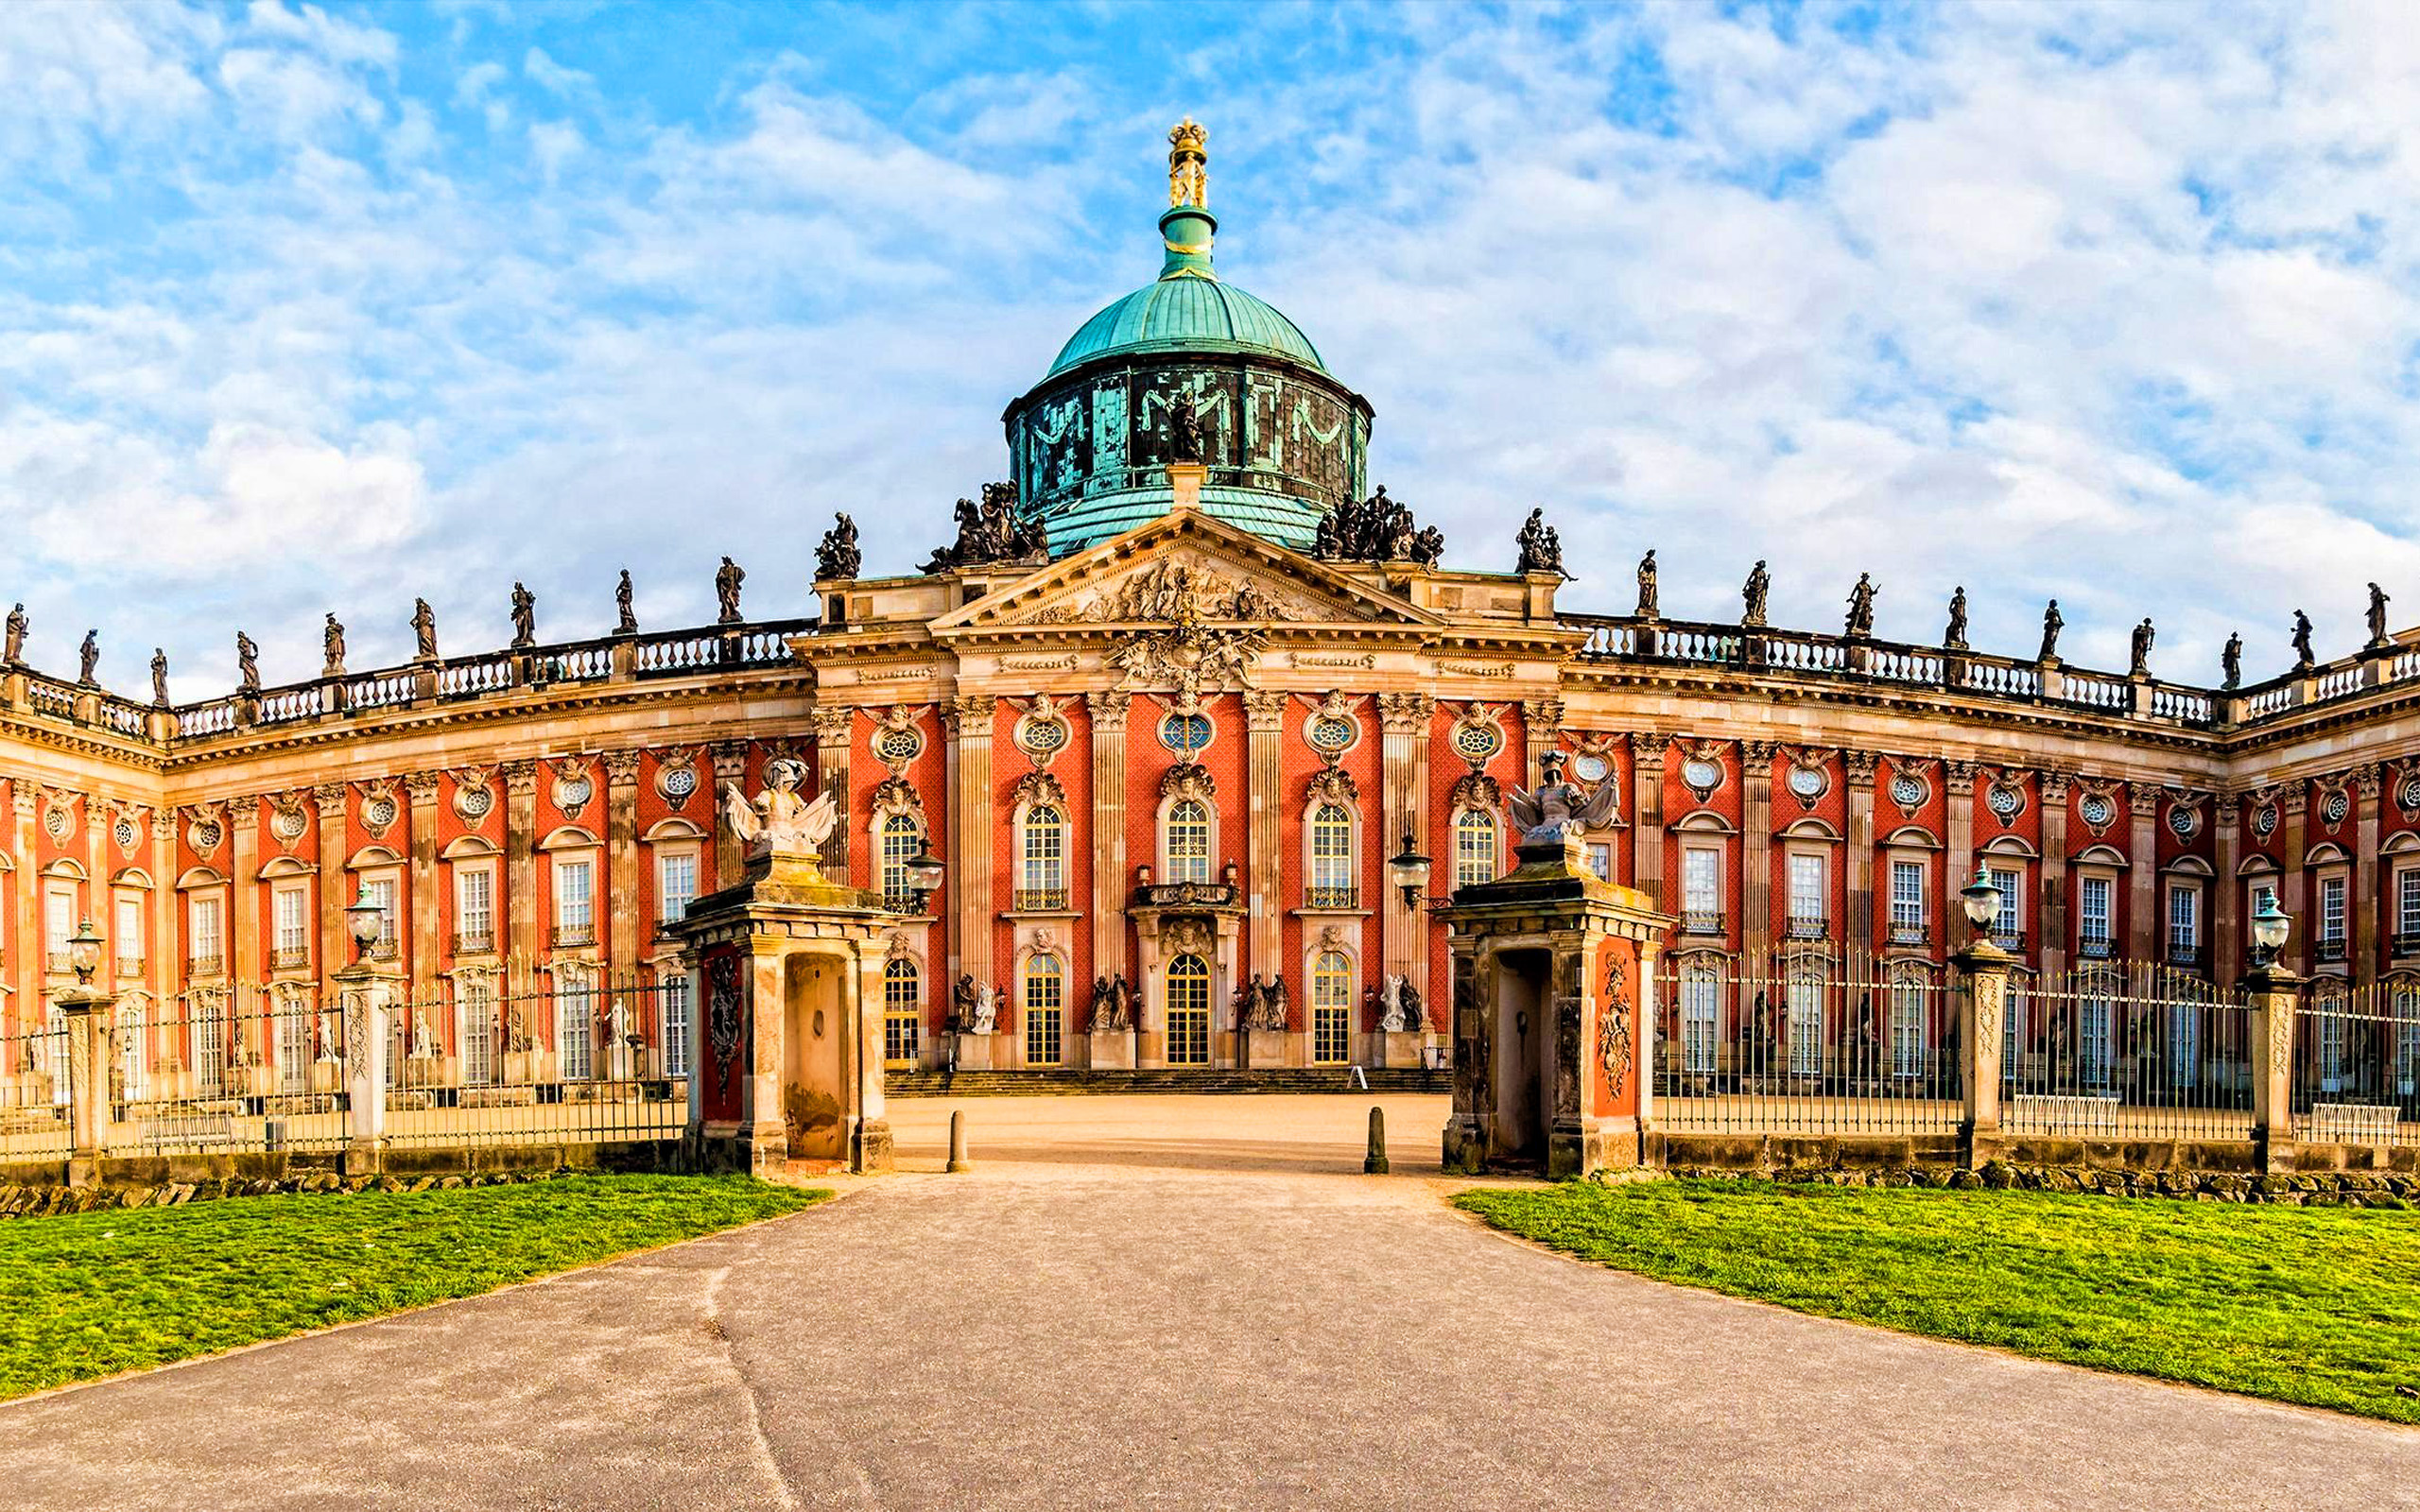 Palace: Sanssouci Palace, Potsdam, Germany, Built under Frederick the Great, The mid-1700s. 2560x1600 HD Wallpaper.